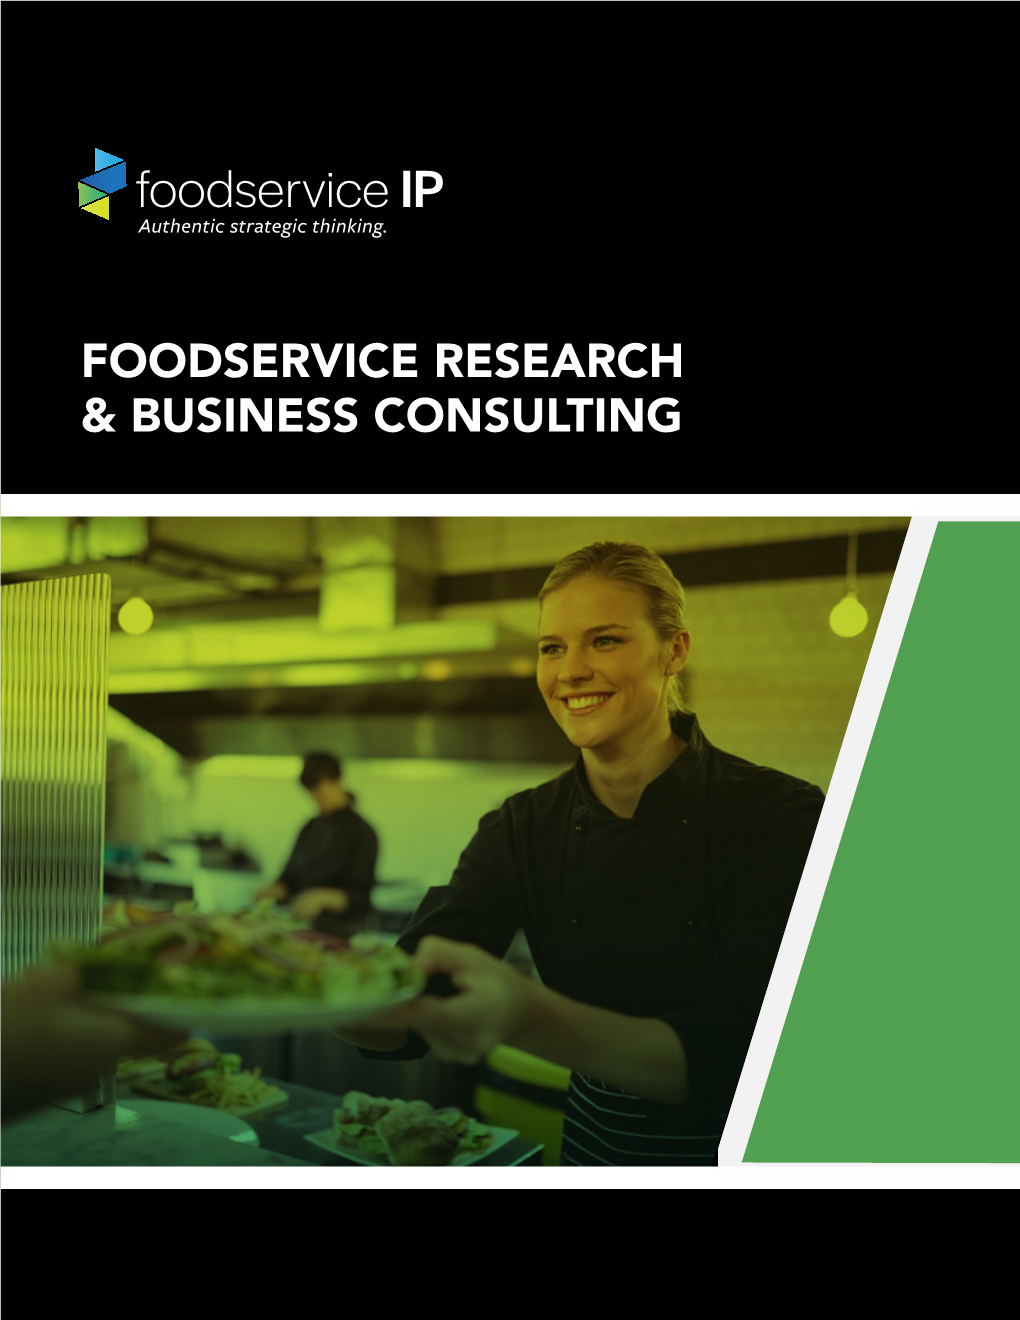 Foodservice Research & Business Consulting